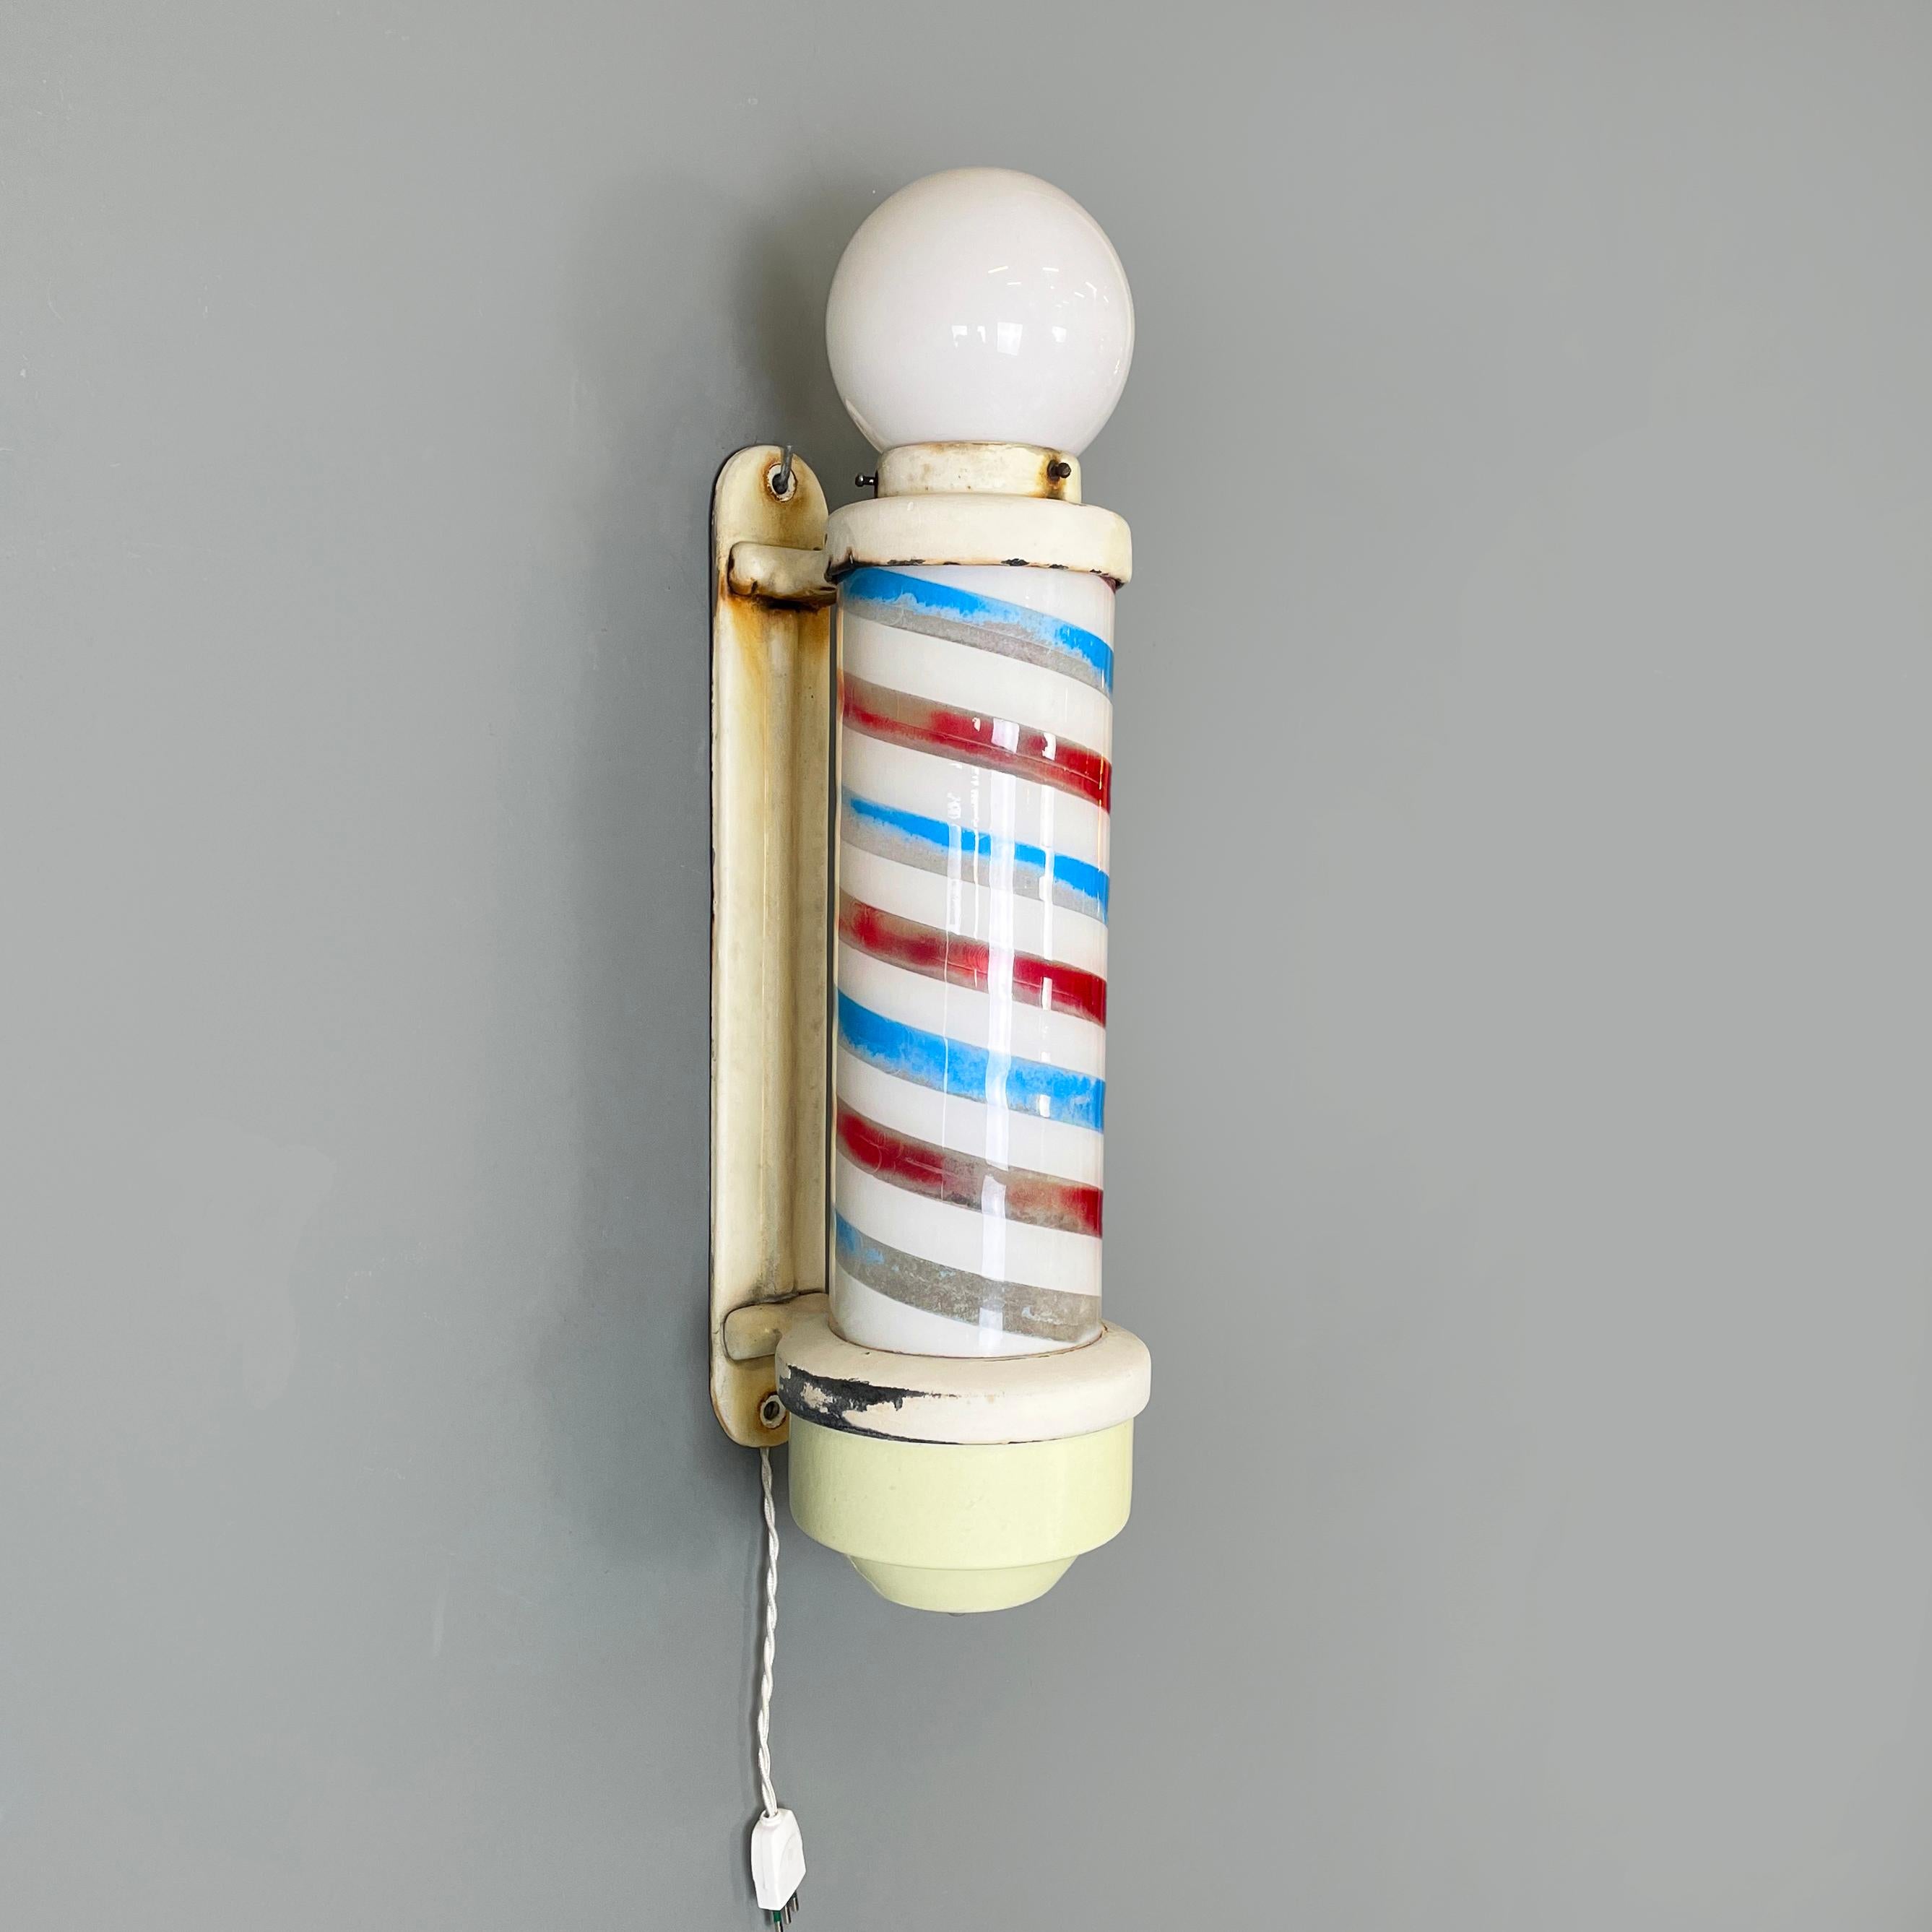 USA mid-century Lighted barber Pole in plastic, metal and opaline glass, 1950s
Illuminated barber shop wall sign with round base, also known as Barber Pole. On the upper part it has an opaline glass sphere with light. The central part in white, red